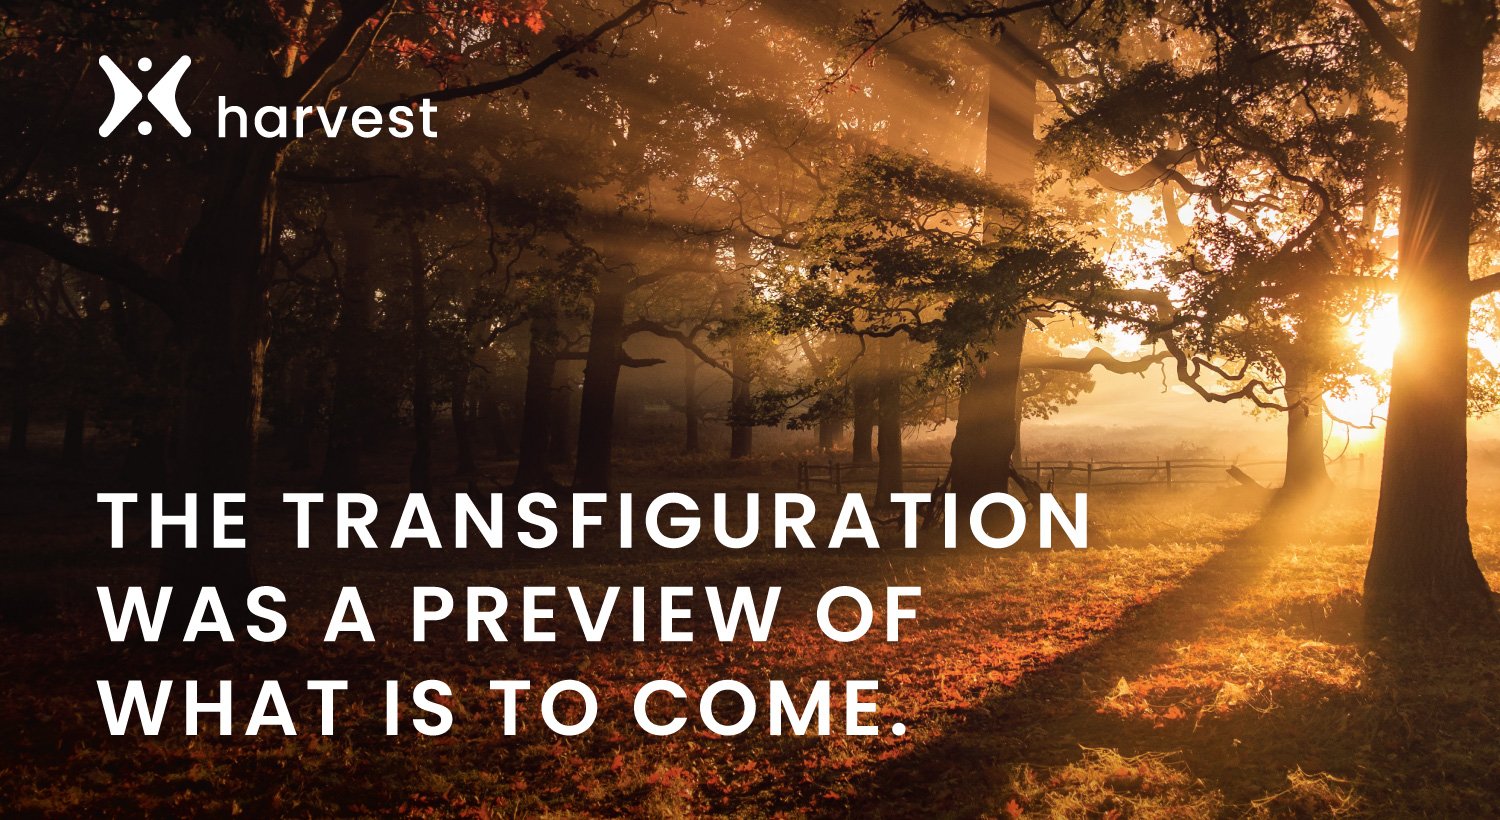 The Transfiguration was a preview of what is to come.